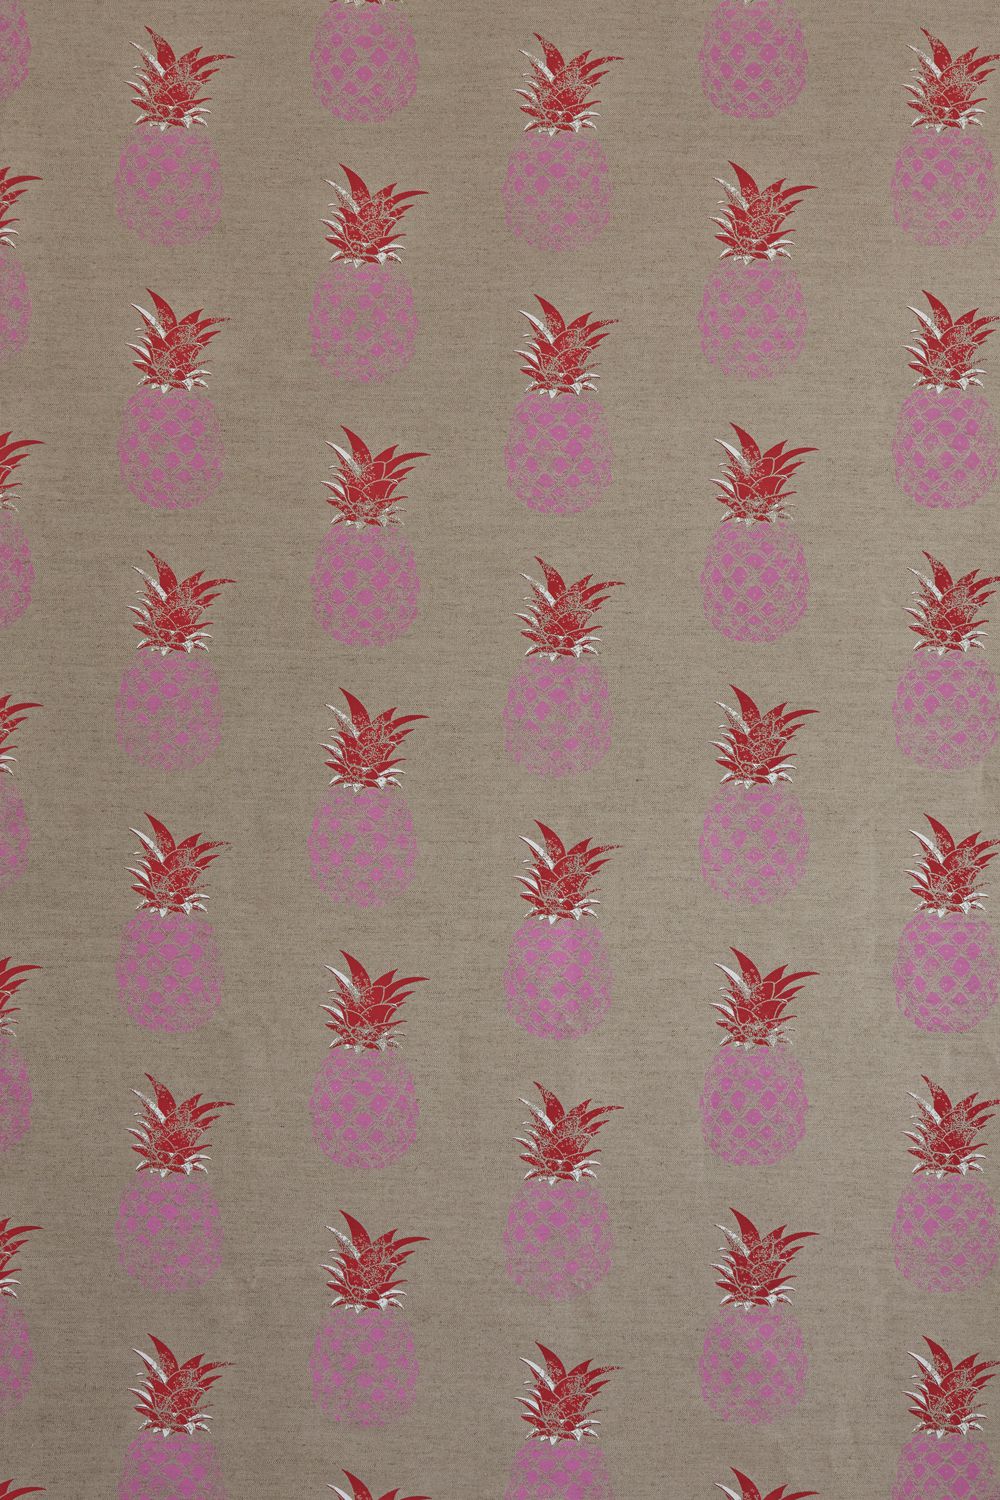 Pineapple - Pink Red on Natural Fabric